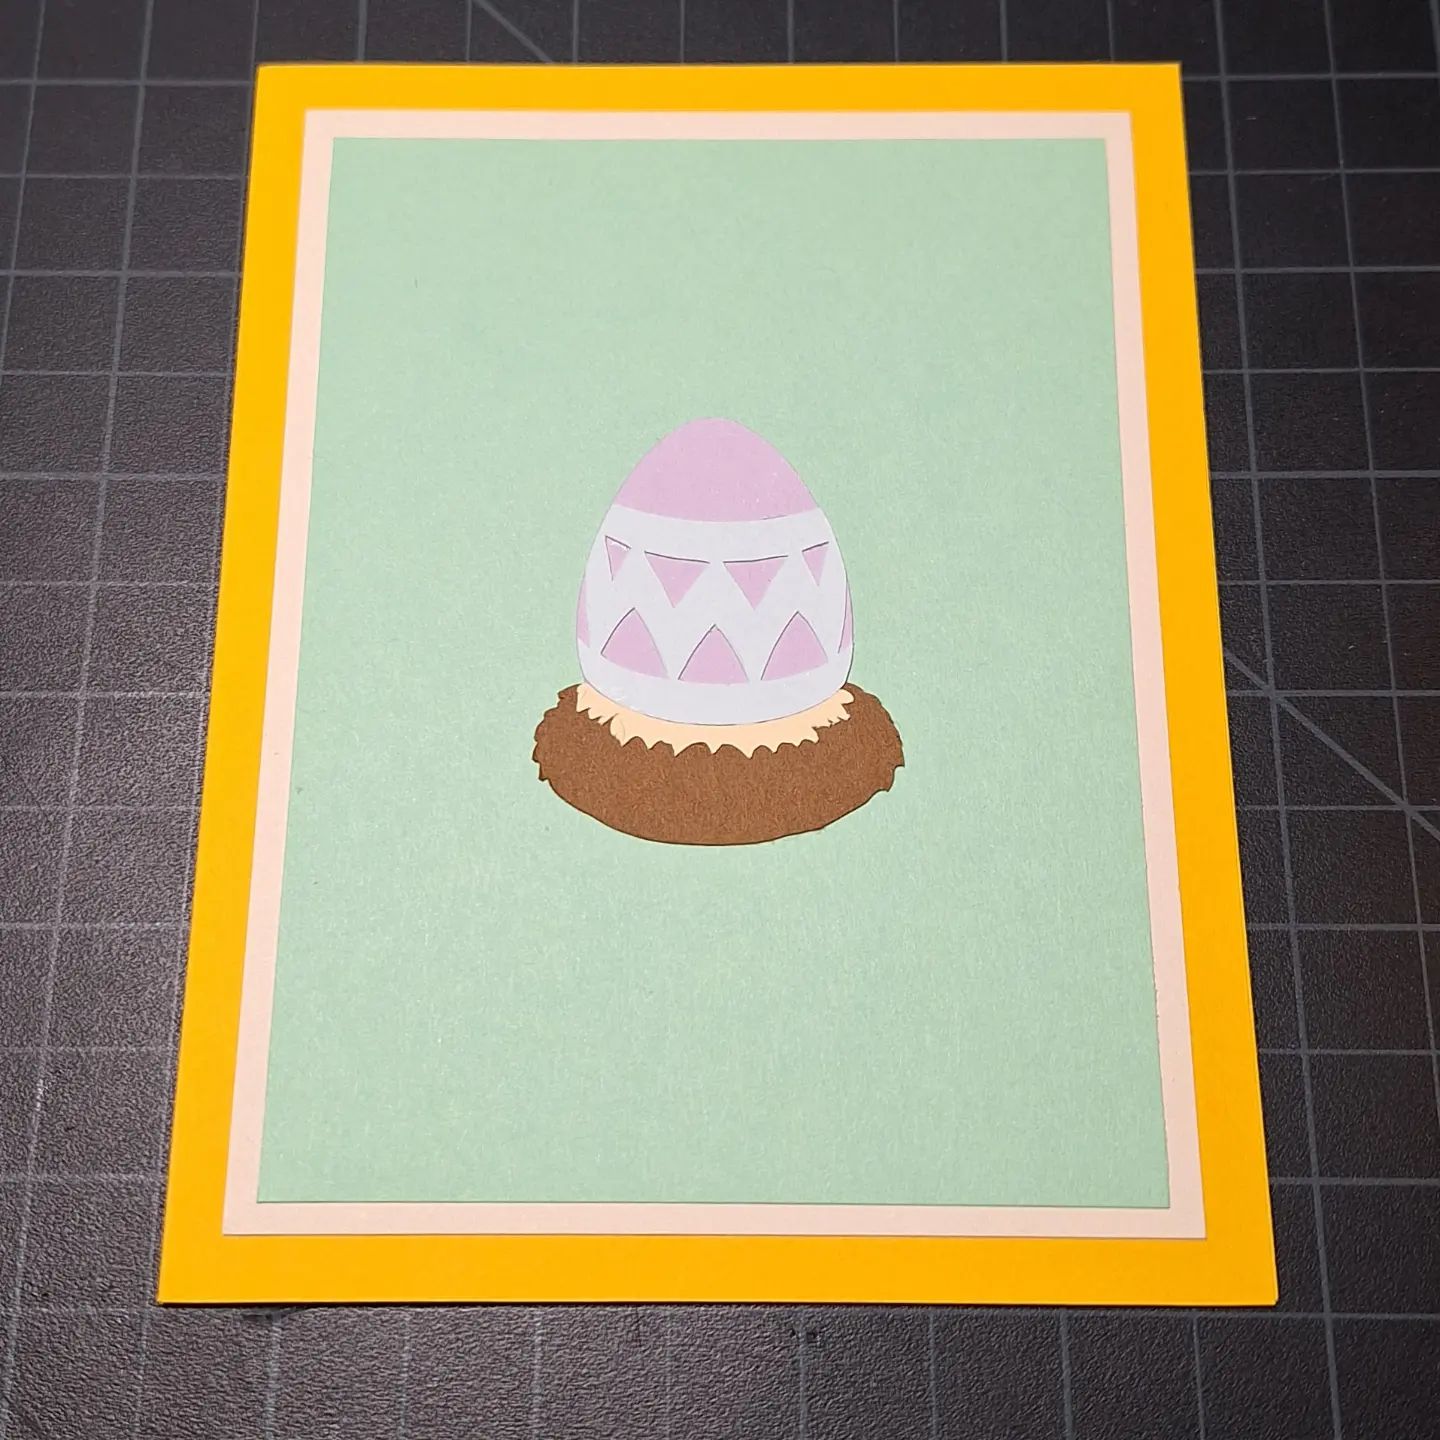 Easter card theres 2 with different colored eggs #easter #card #papercrafts #papercraft #eastercard #eastercards